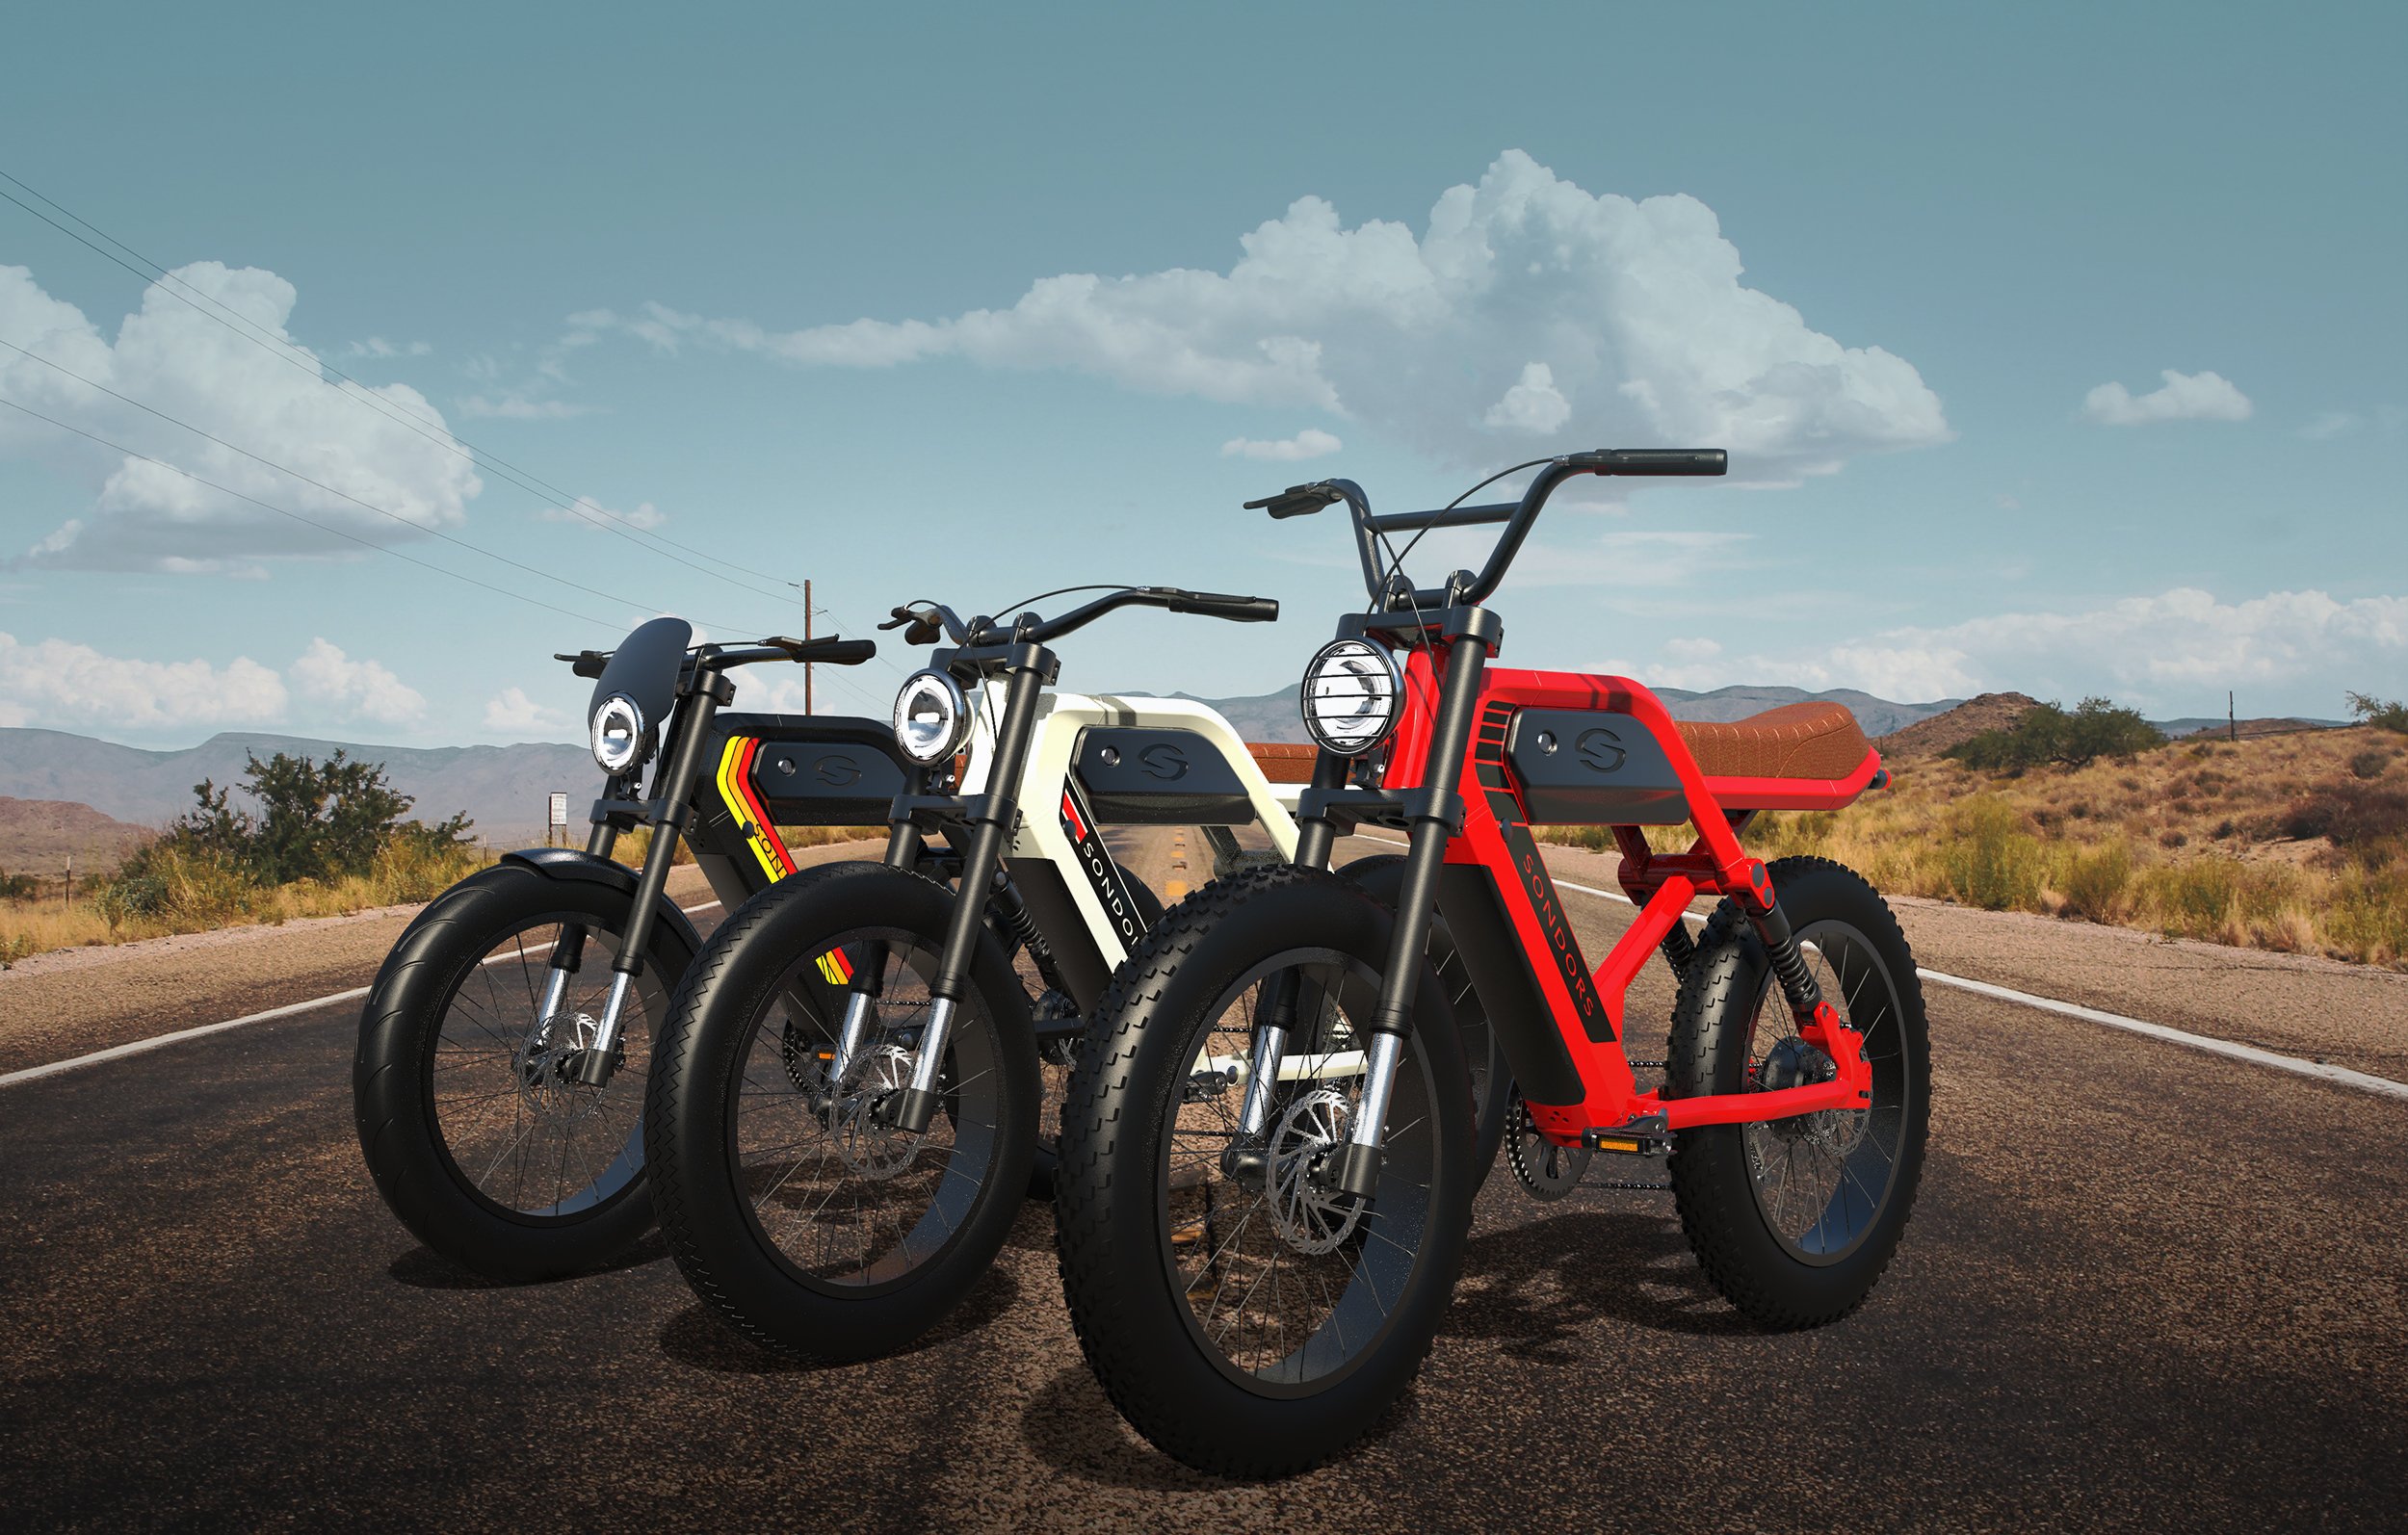 SONDORS MadMods unveiled long-range and low-cost electric mopeds - Blog - 3